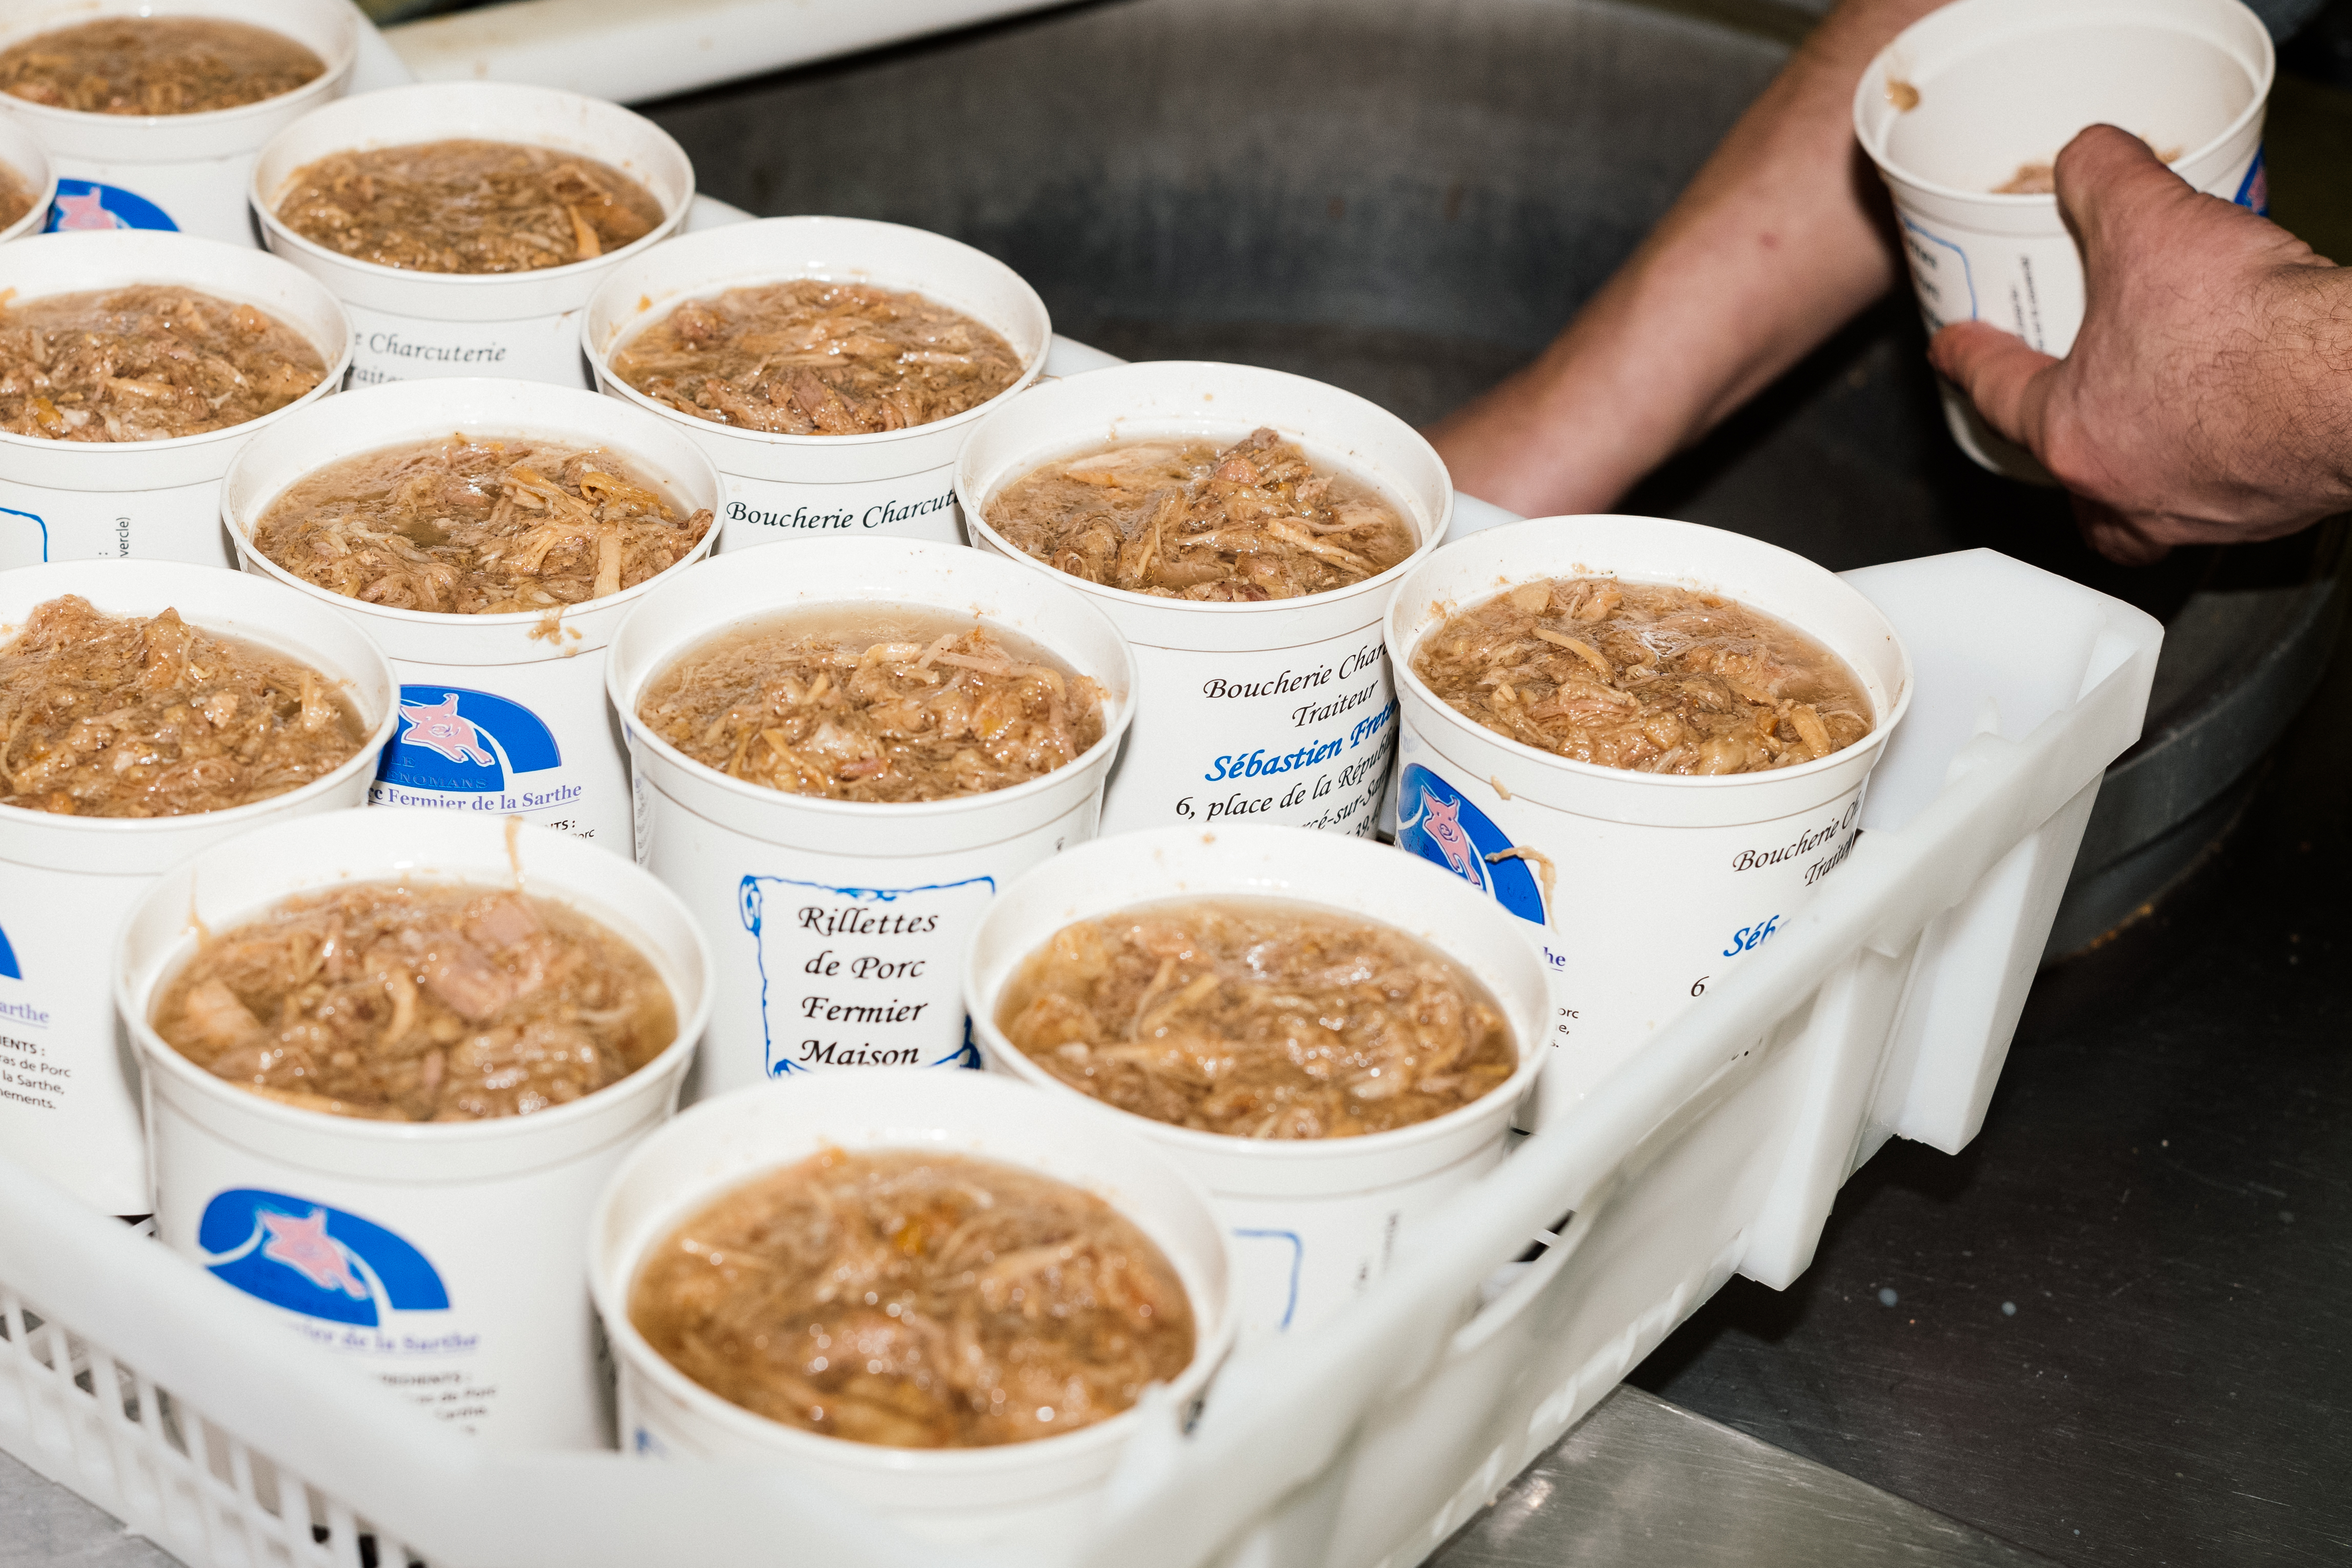 Pork rillettes – carton pint containers full of shredded meat floating in a gelatinous liquid made of fat.